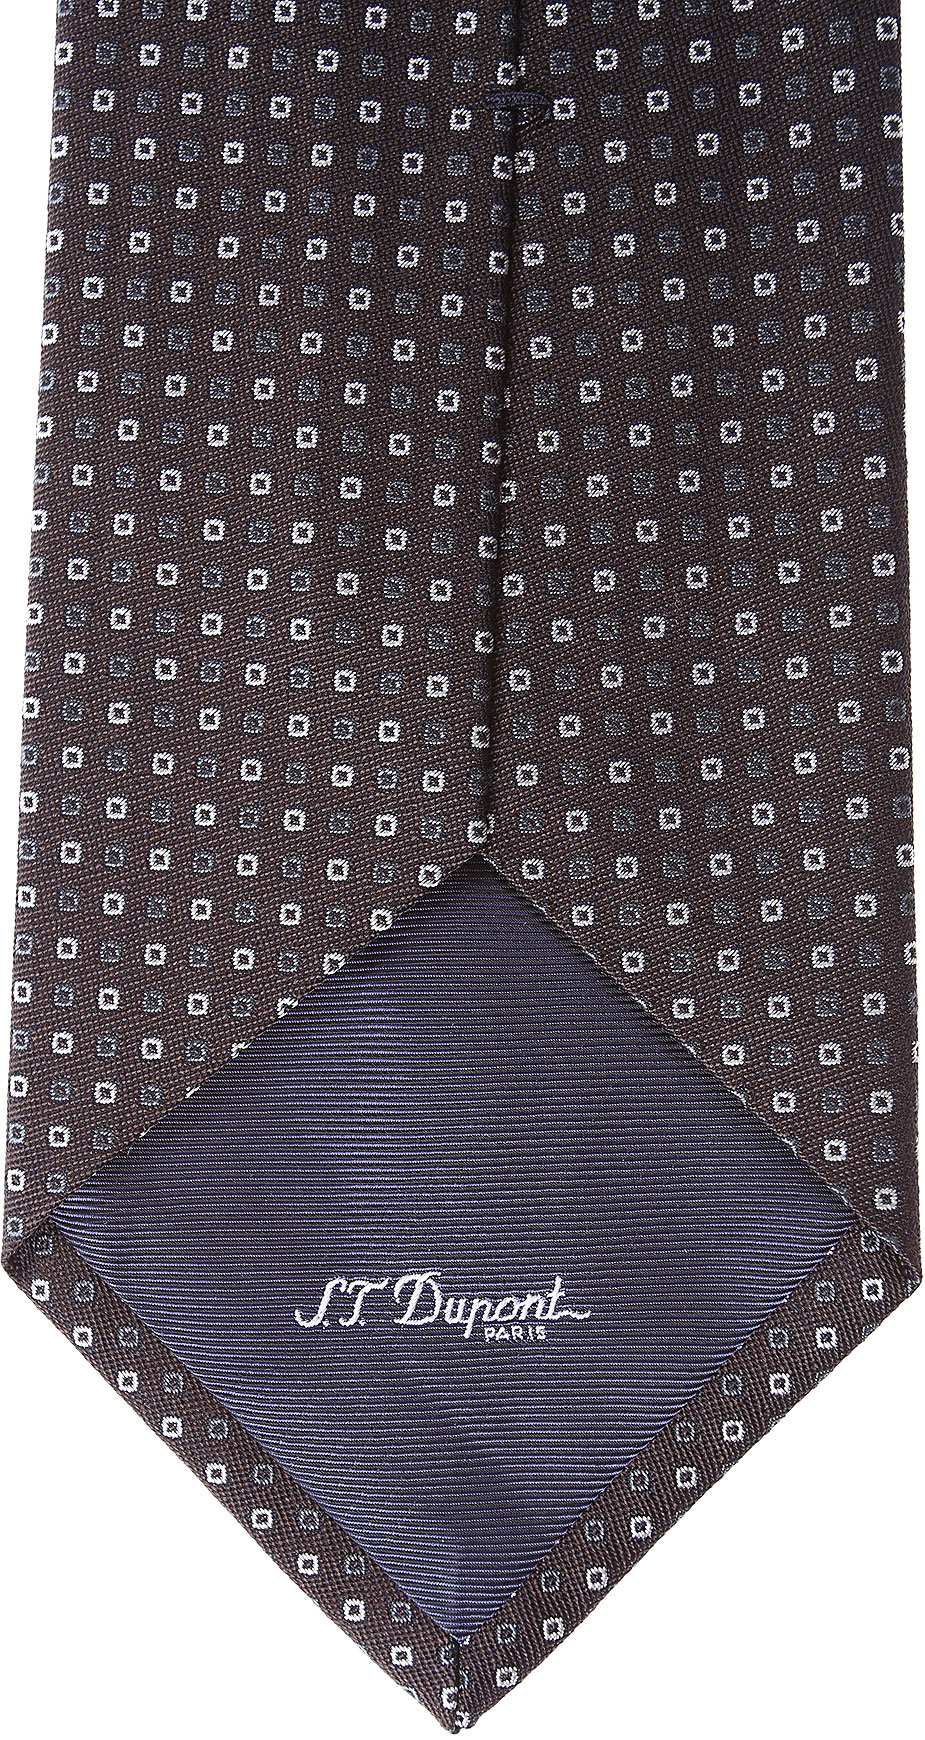 Ties S.T. Dupont, Style code: